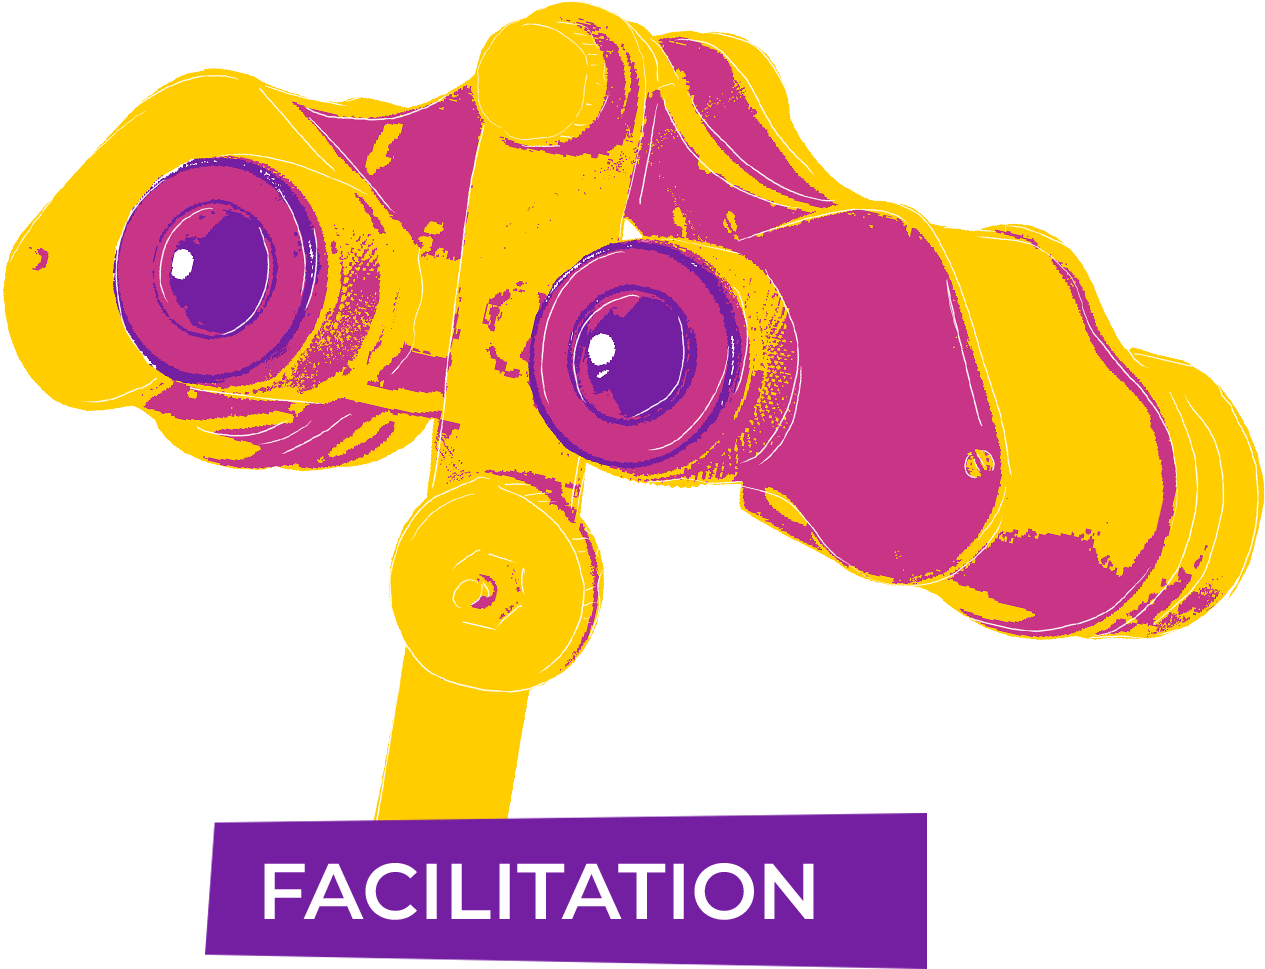 a binocular as symbol of facilitation of learning, with the label FACILITATION